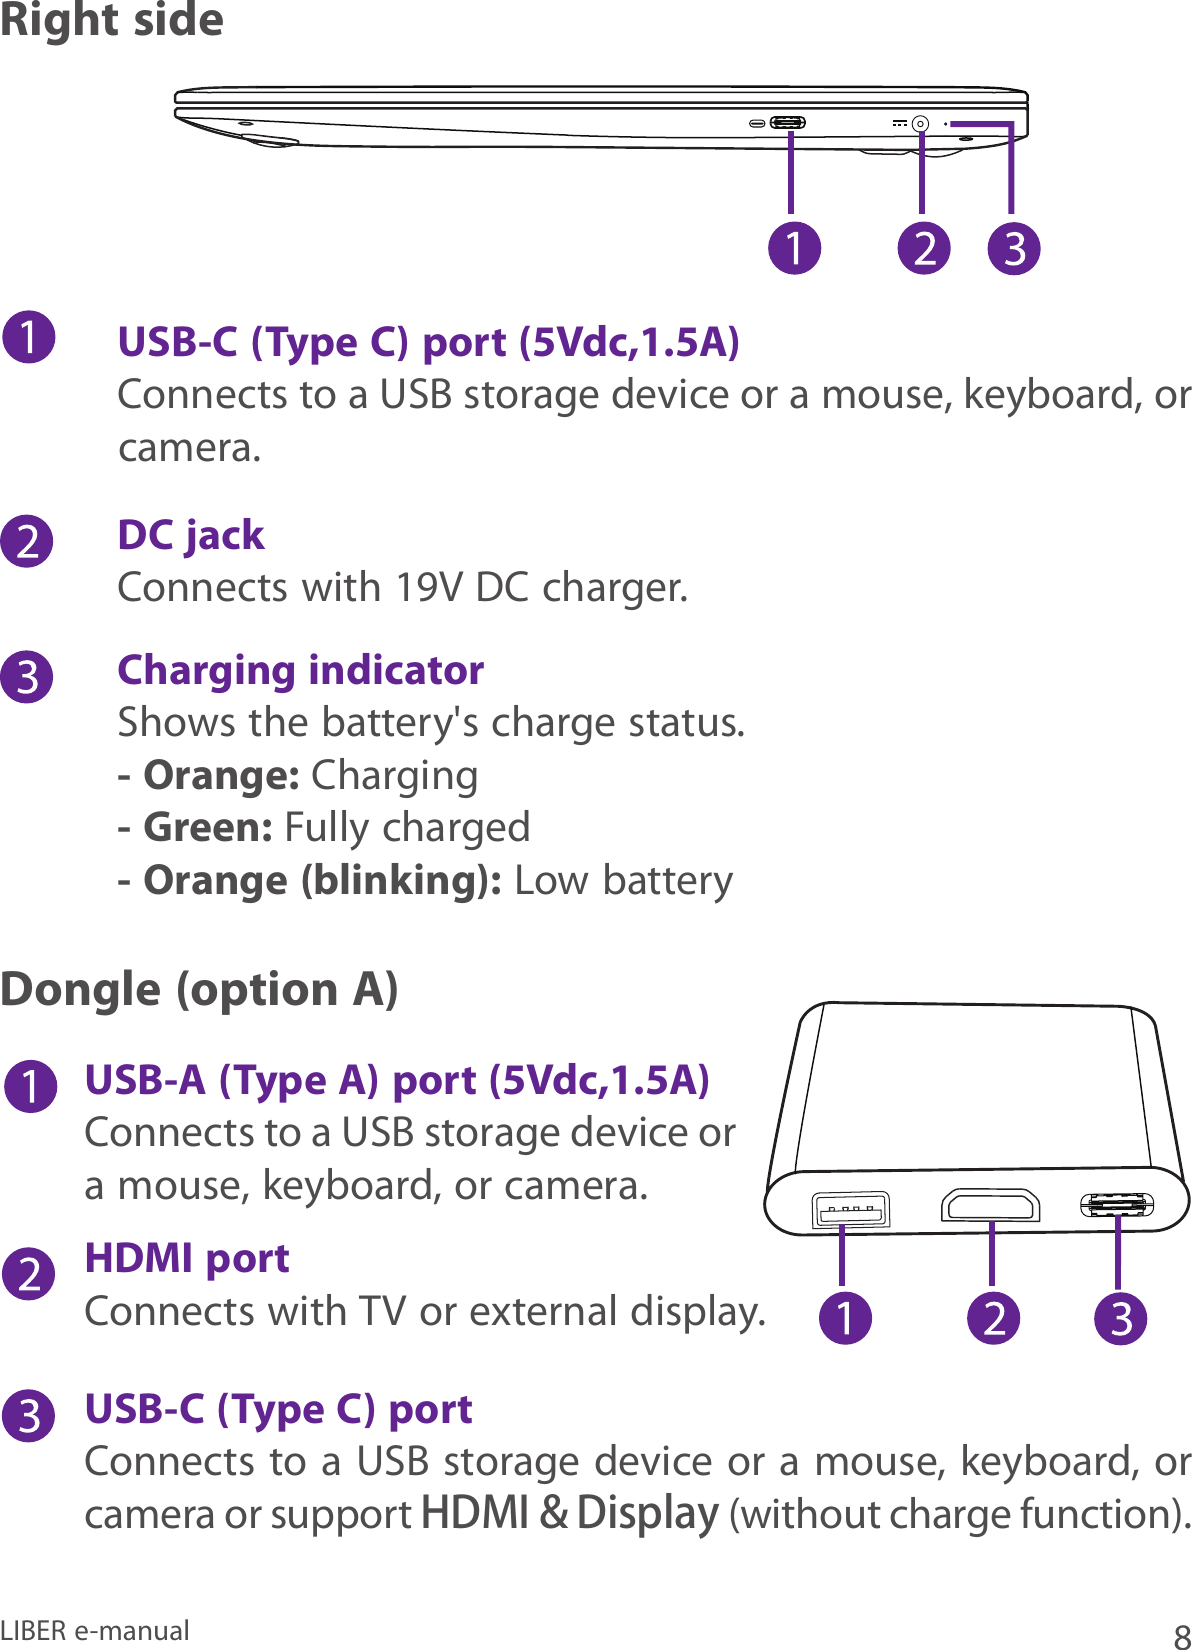 8LIBER e-manualRight sideDC jackConnects with 19V DC charger.Charging indicatorShows the battery&apos;s charge status.- Orange: Charging- Green: Fully charged- Orange (blinking): Low batteryUSB-C (Type C) port (5Vdc,1.5A)Connects to a USB storage device or a mouse, keyboard, or camera.Dongle (option A)USB-A (Type A) port (5Vdc,1.5A)Connects to a USB storage device or a mouse, keyboard, or camera.HDMI portConnects with TV or external display.USB-C (Type C) port Connects to a USB storage device or a mouse, keyboard, or camera or support HDMI &amp; Display (without charge function).